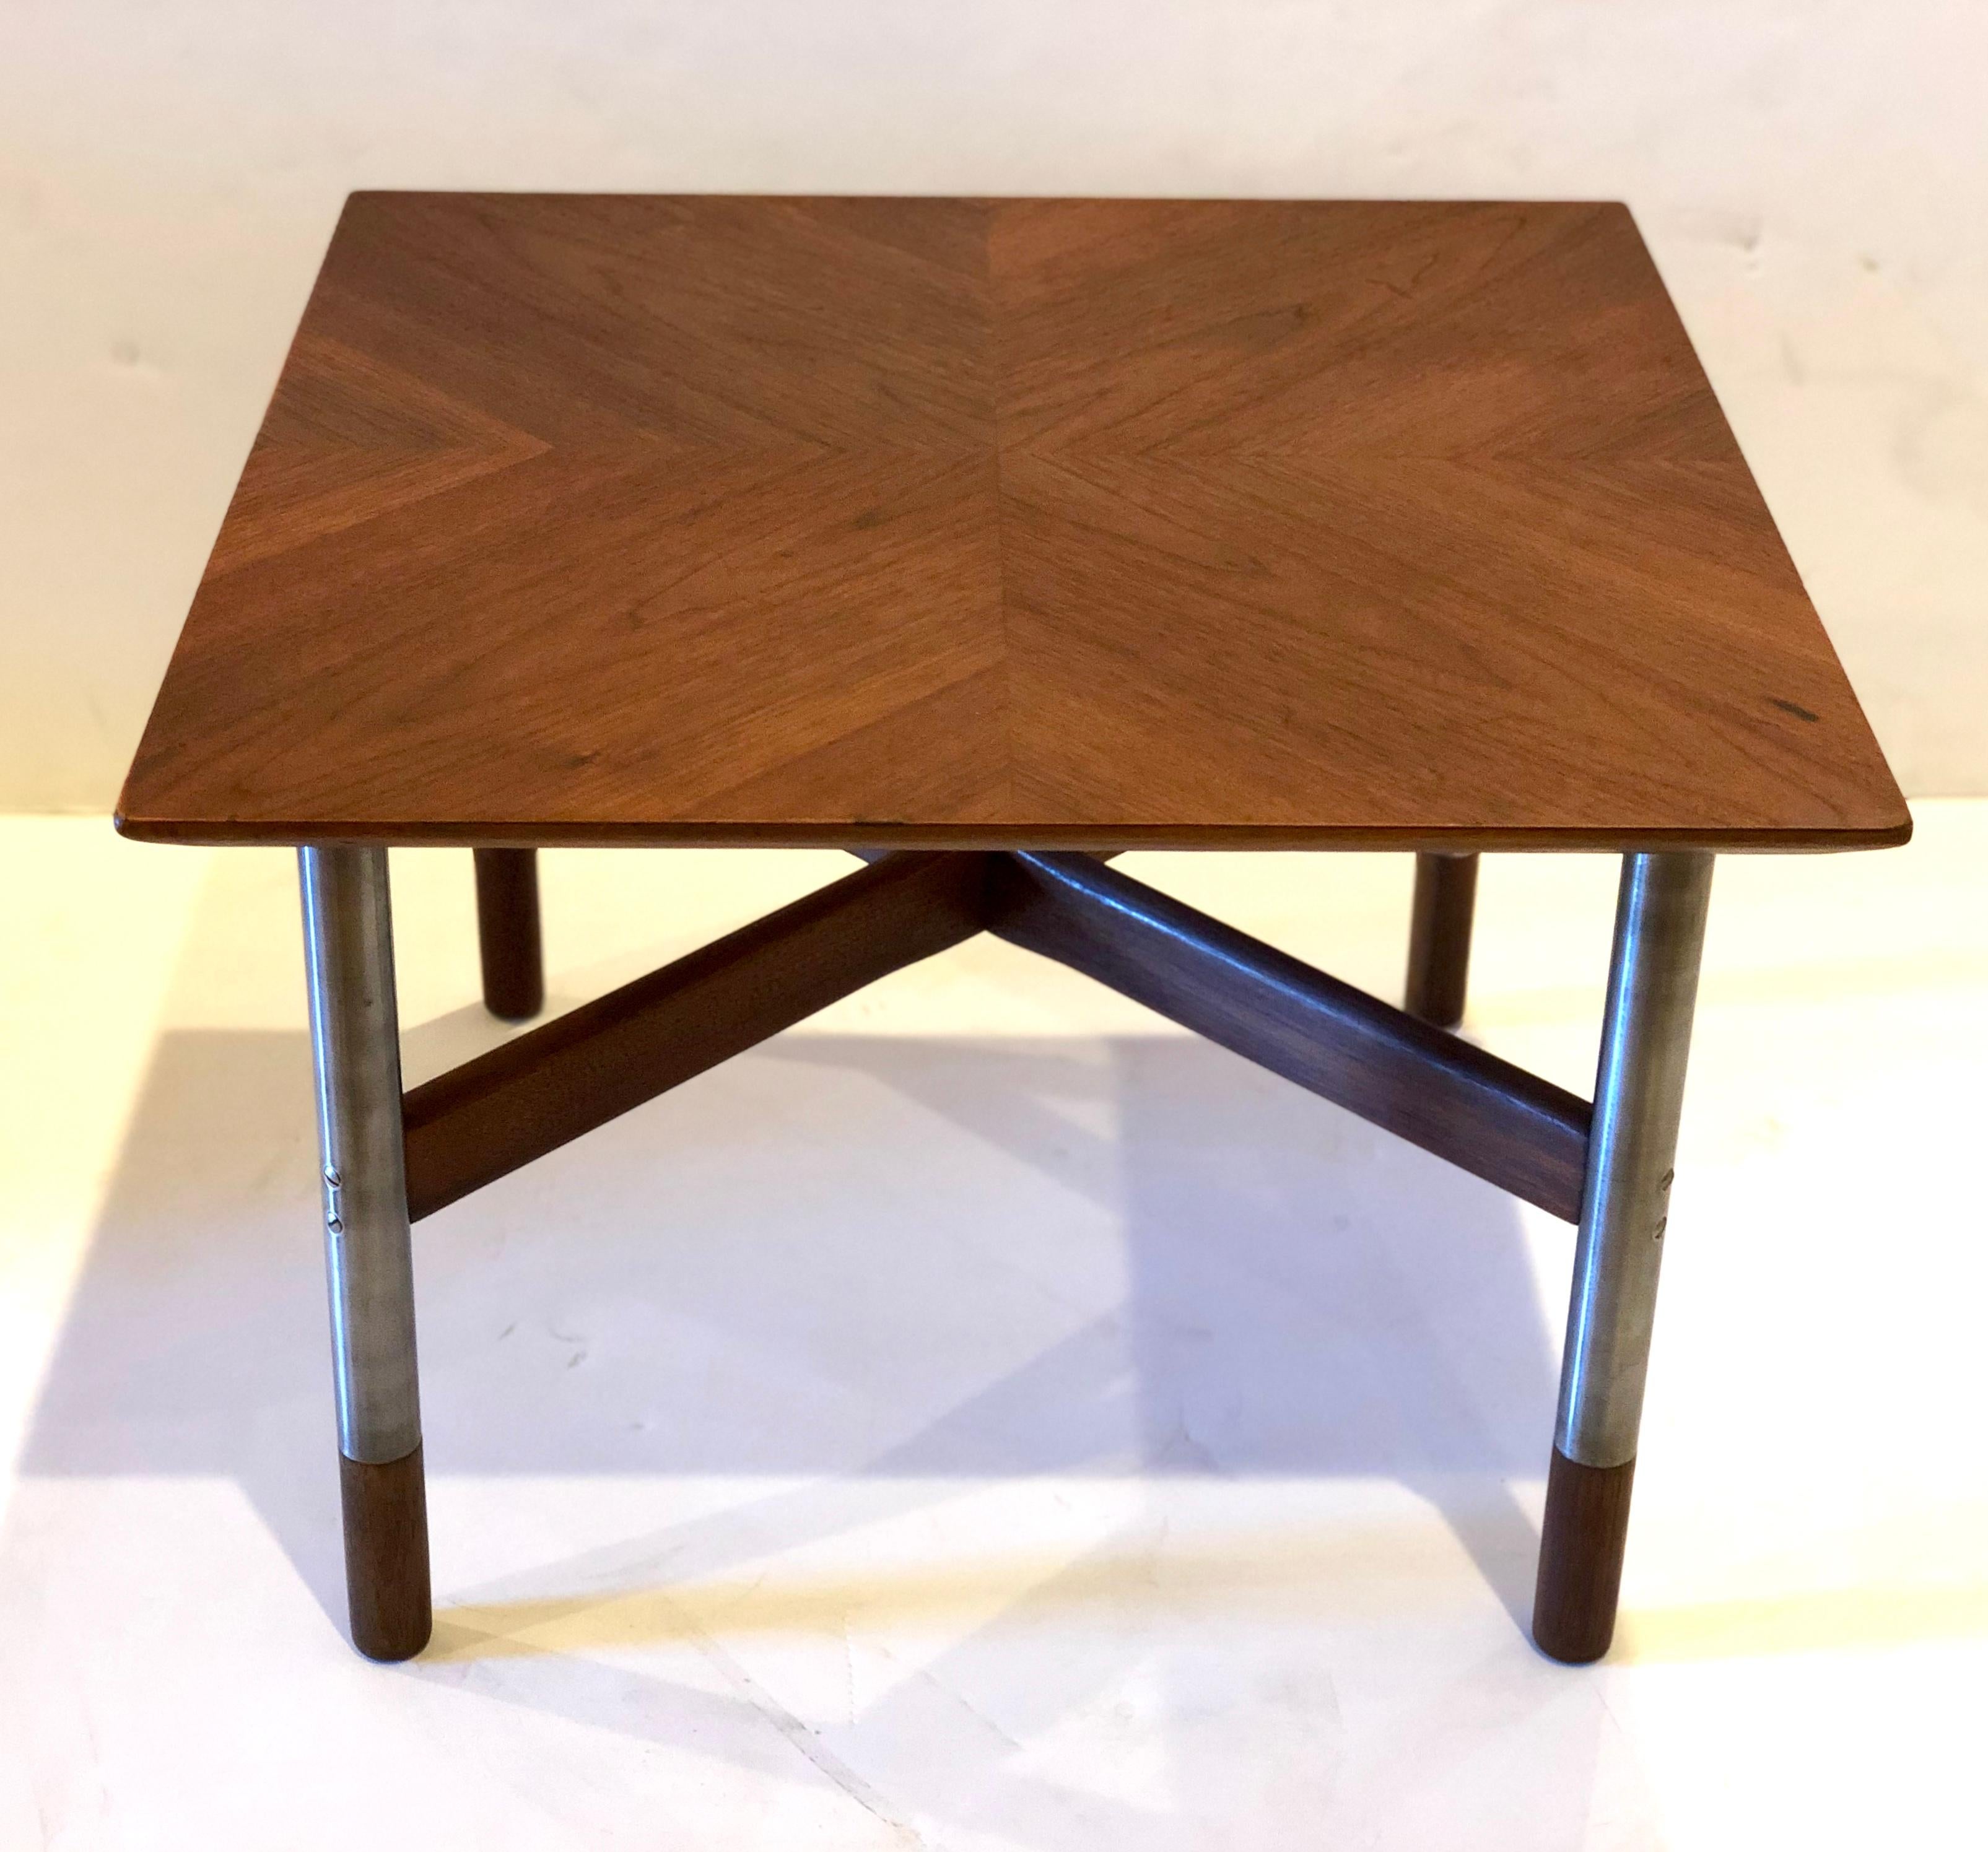 Beautiful and rare small square table with inlaid design top, beveled edge and crossbar base, stainless steel legs with teak tips, very similar to Finn Juhl designs.